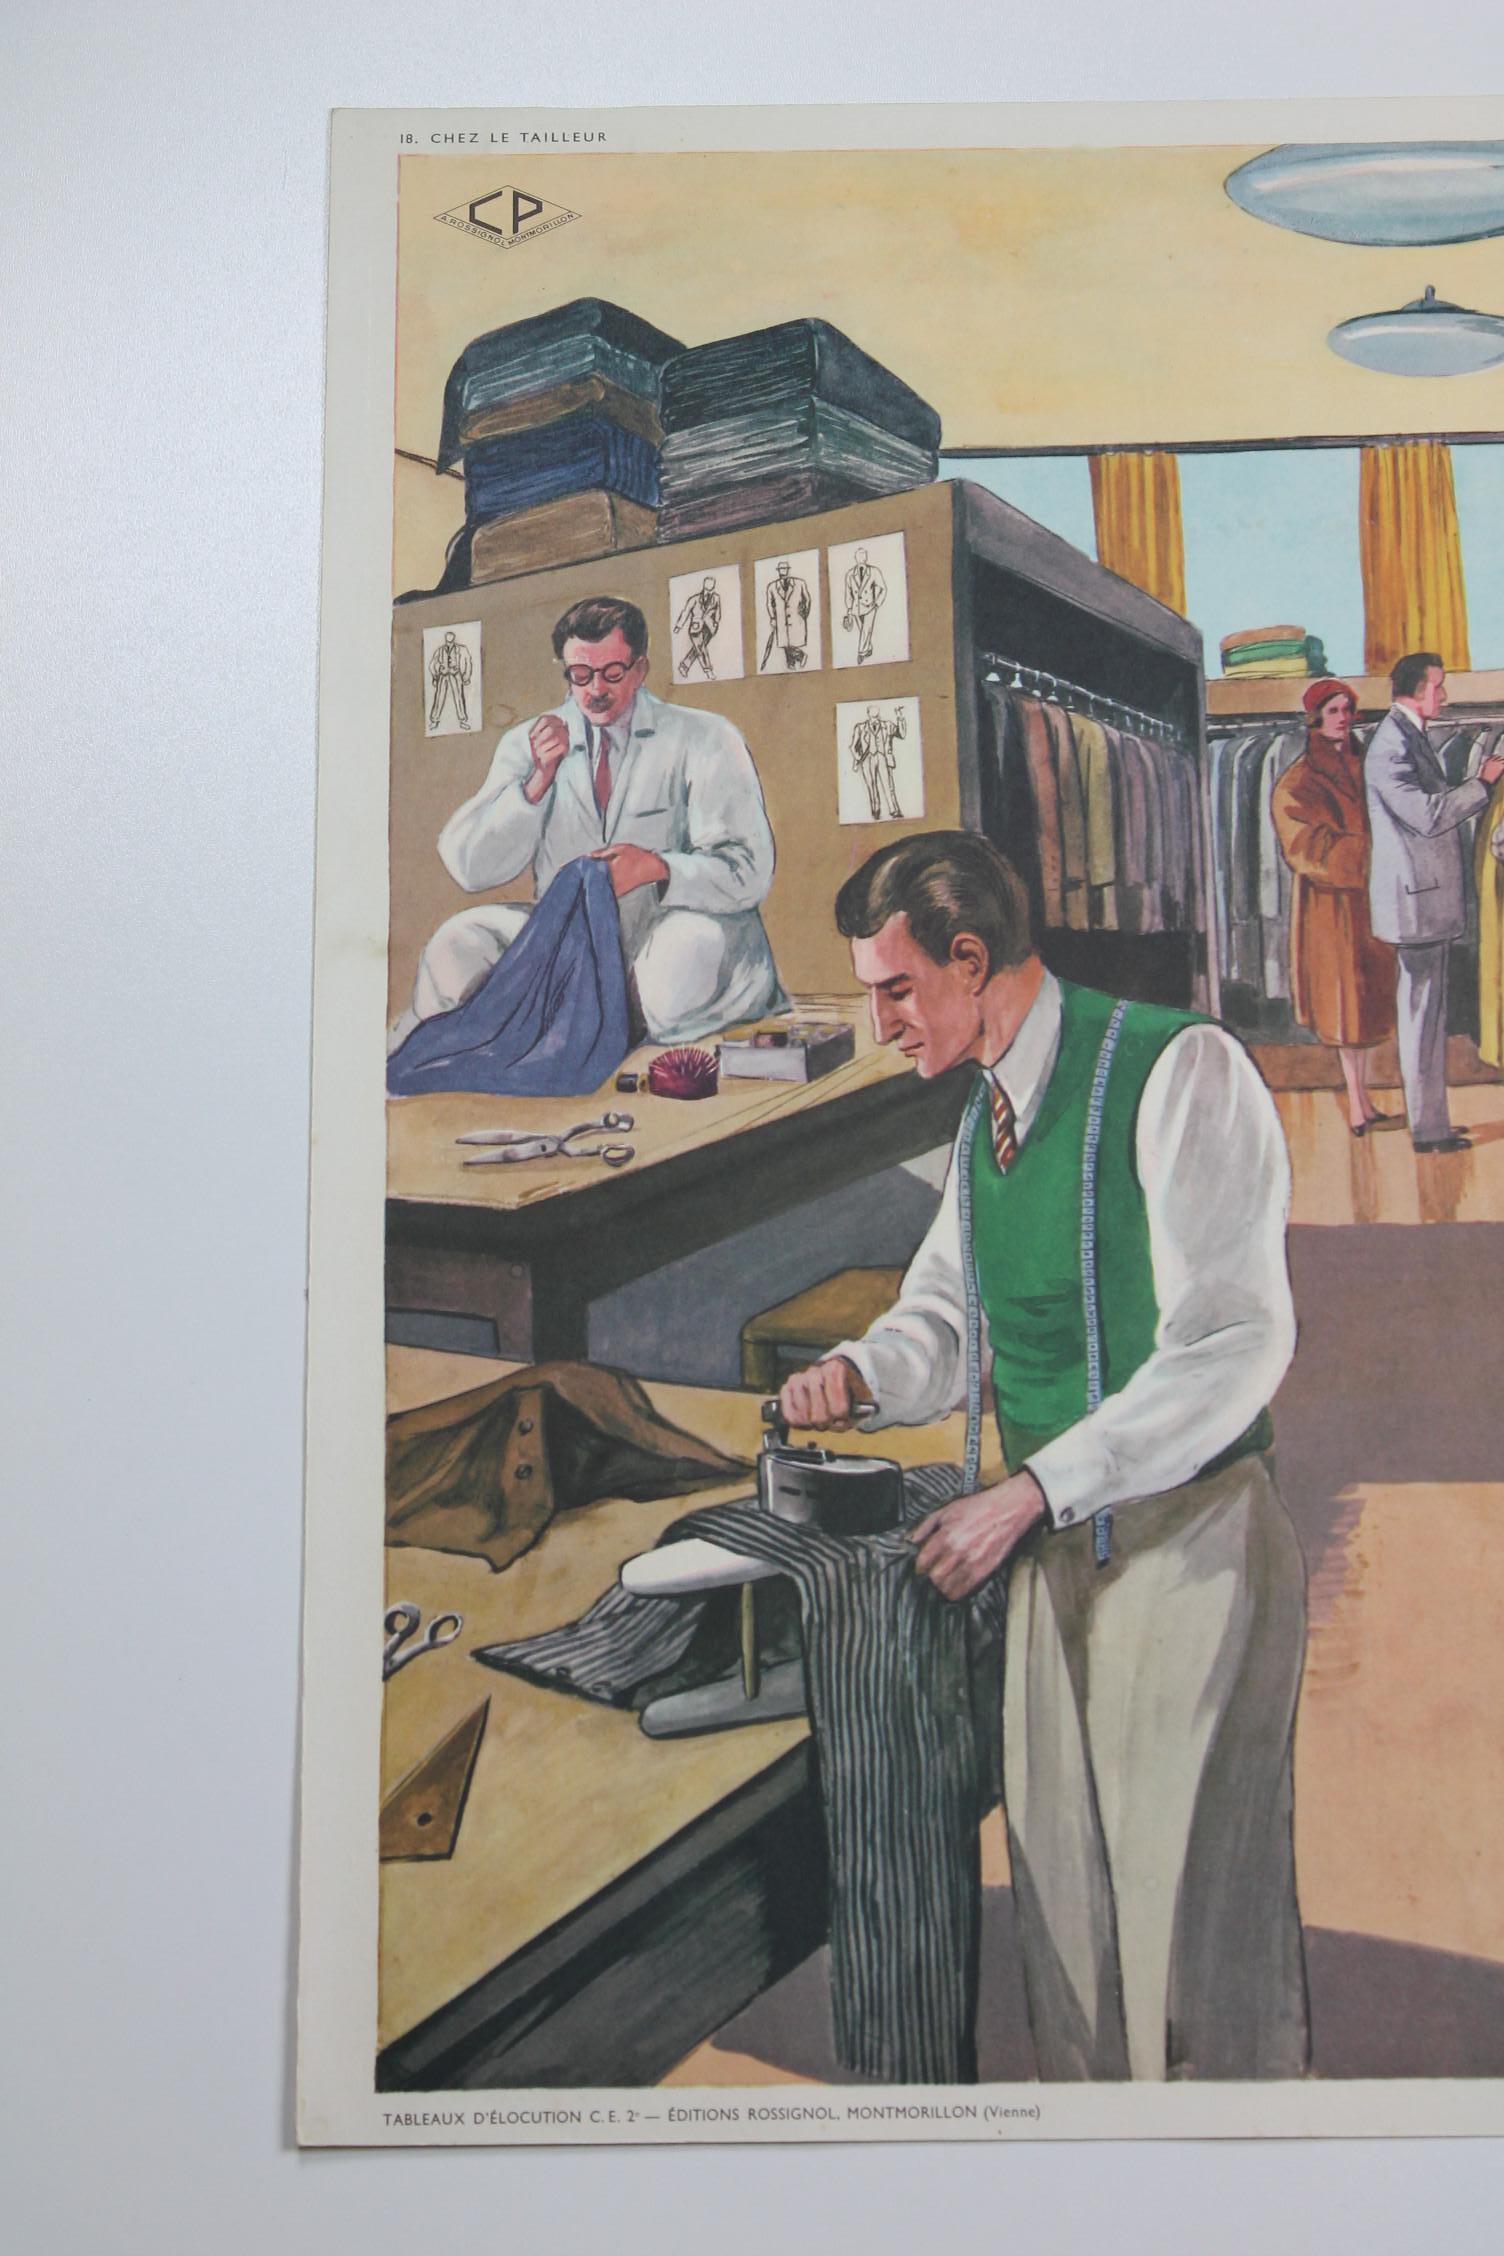 Vintage 1950s School Chart - Teaching Chart - School Poster on thick paper.
Theme : at the Tailor's Shop.
This Old School Teaching Equipment has a very nice detailed view on the activity of a costume maker, 
who makes custom made clothing like